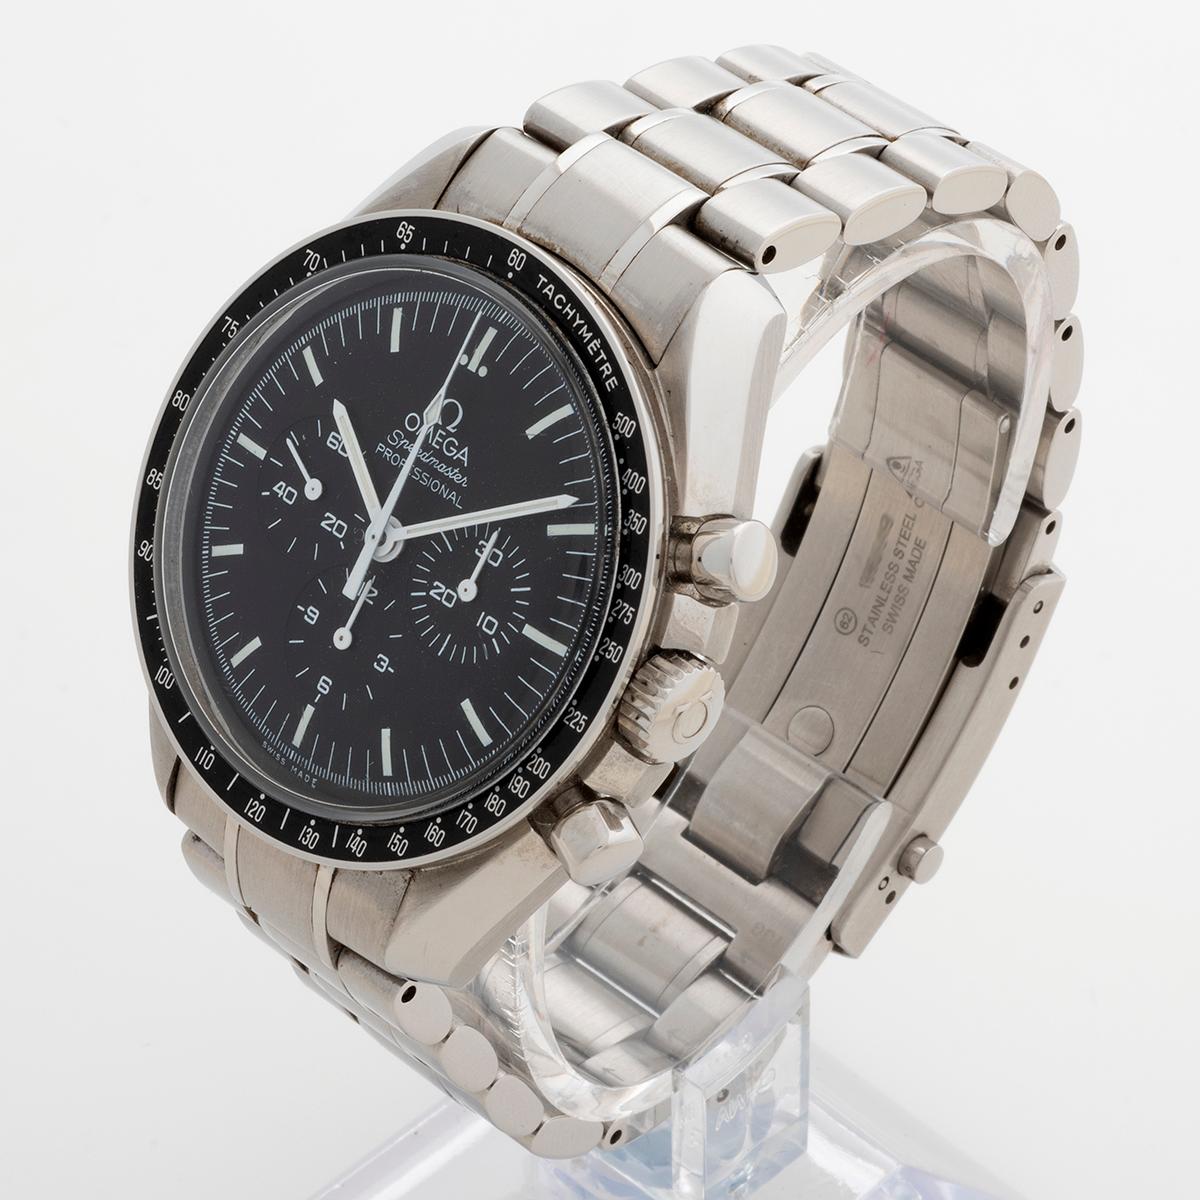 Women's or Men's Omega Speedmaster Professional Moonwatch ref 37505000. (Discontinued). Yr 2014. For Sale